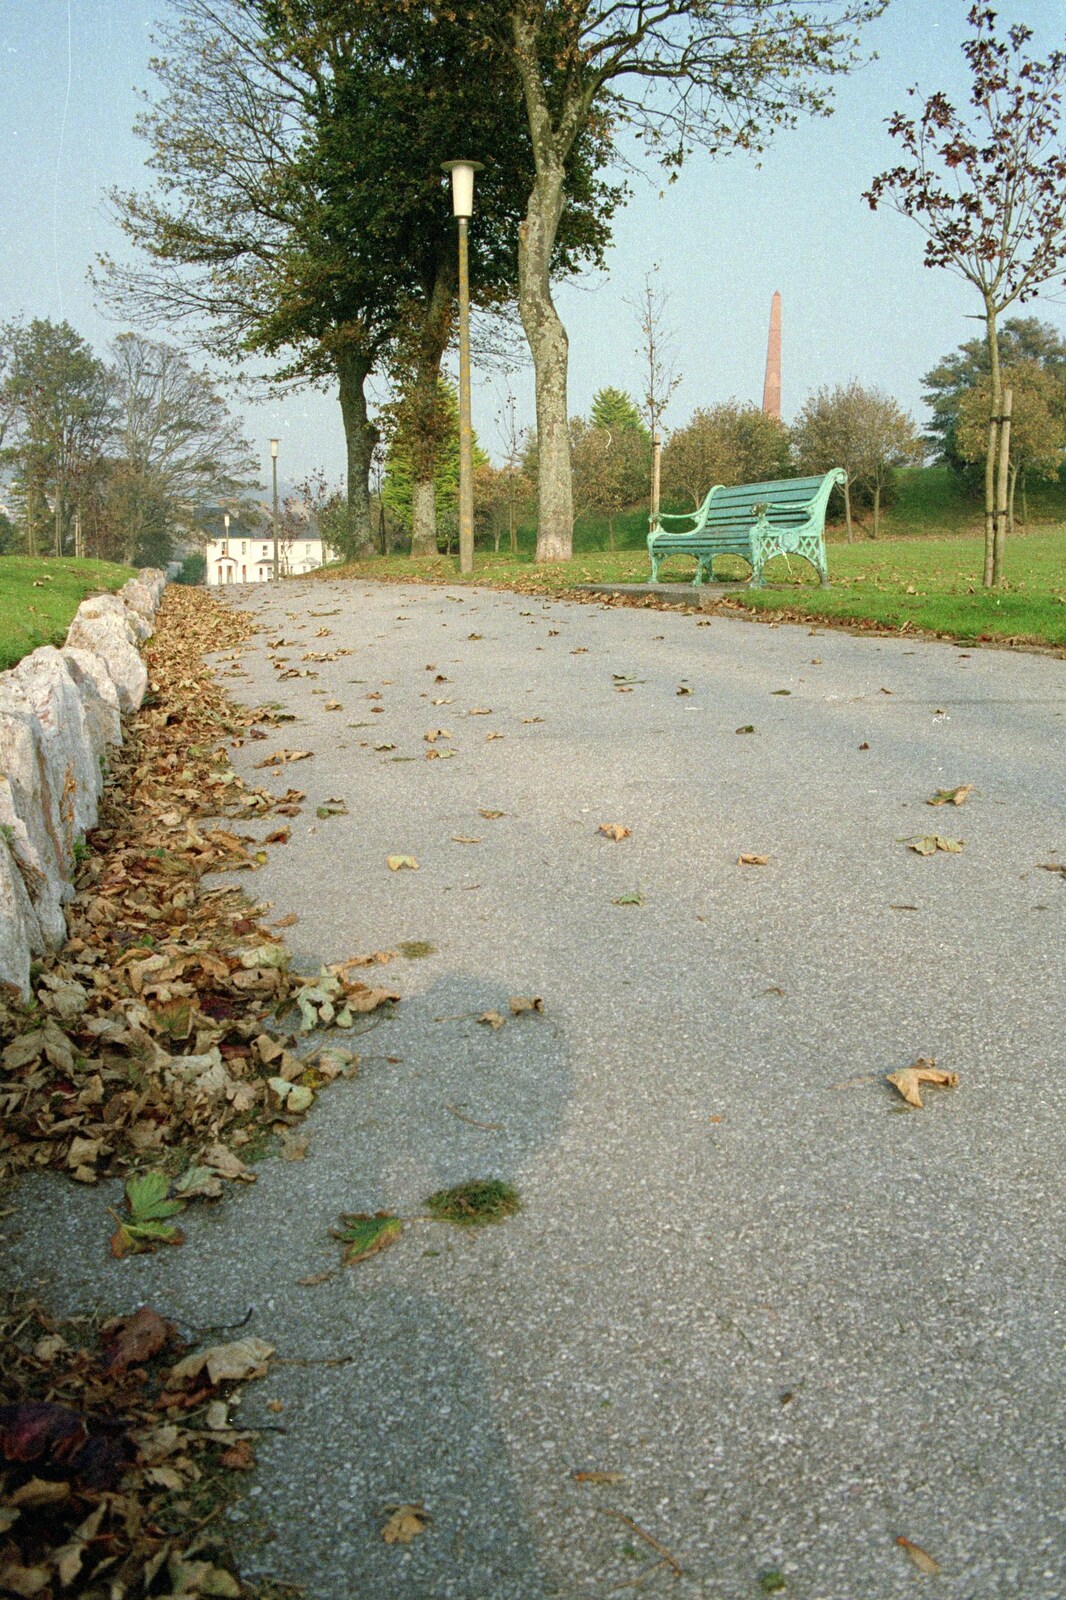 Leaves blow about on a path from Uni: A Plymouth Hoe Kickabout, Plymouth, Devon - 20th October 1986